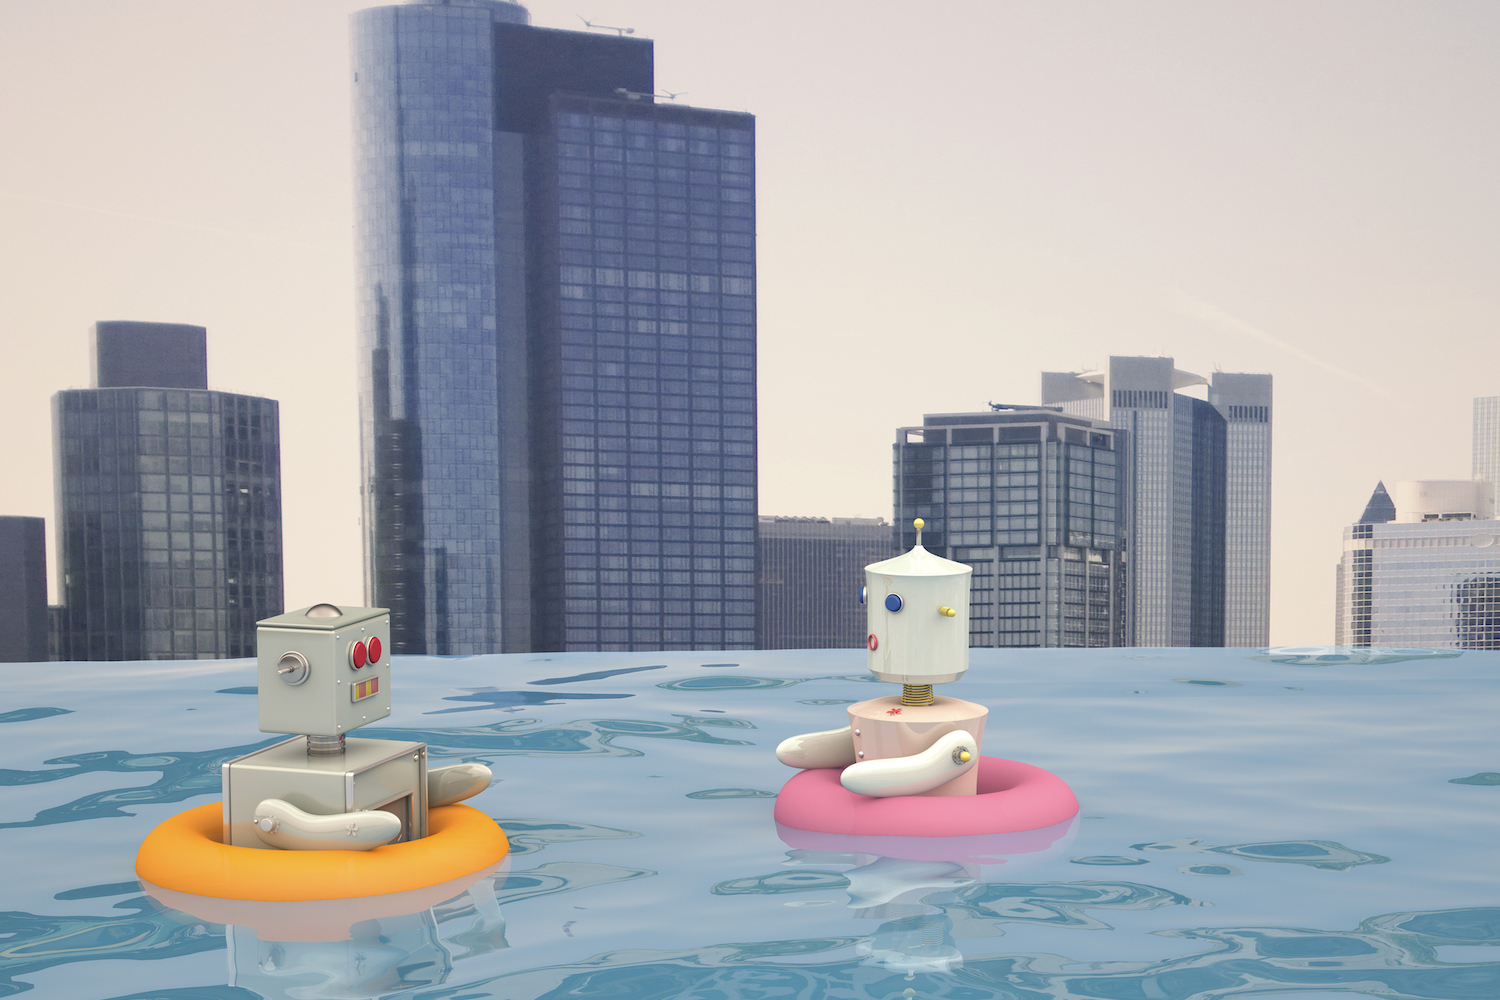 Male and female robot with floating tires swimming in pool in front of city skyline, 3D rendering